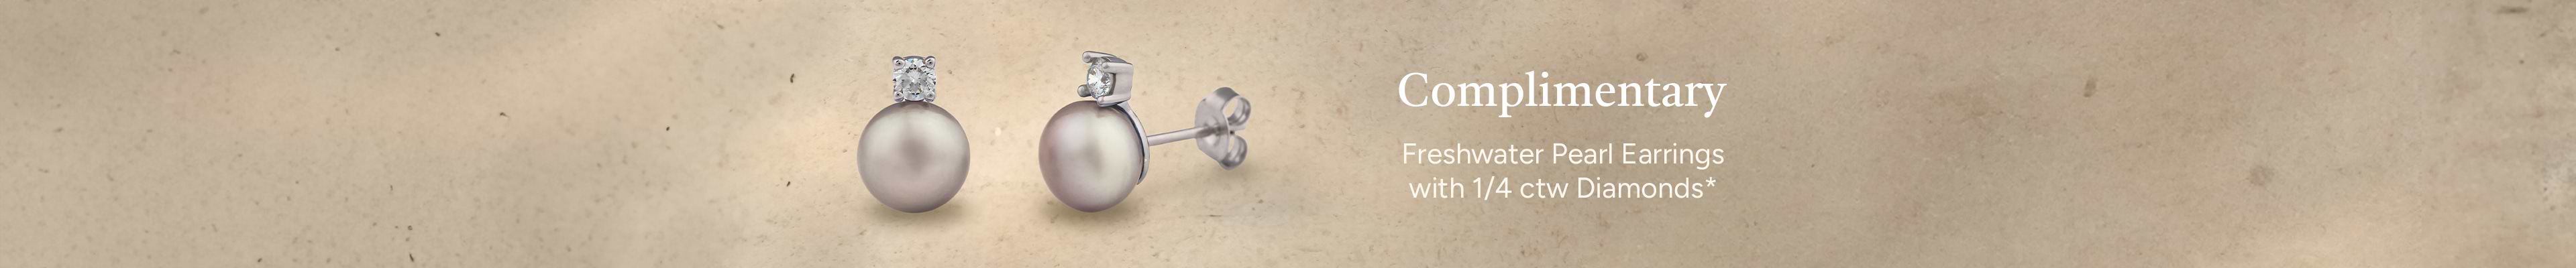 Complimentary Color Enhanced Gray Freshwater Pearl and Round Lab Grown Diamond Earrings with Purchase of CA$3,700 or More